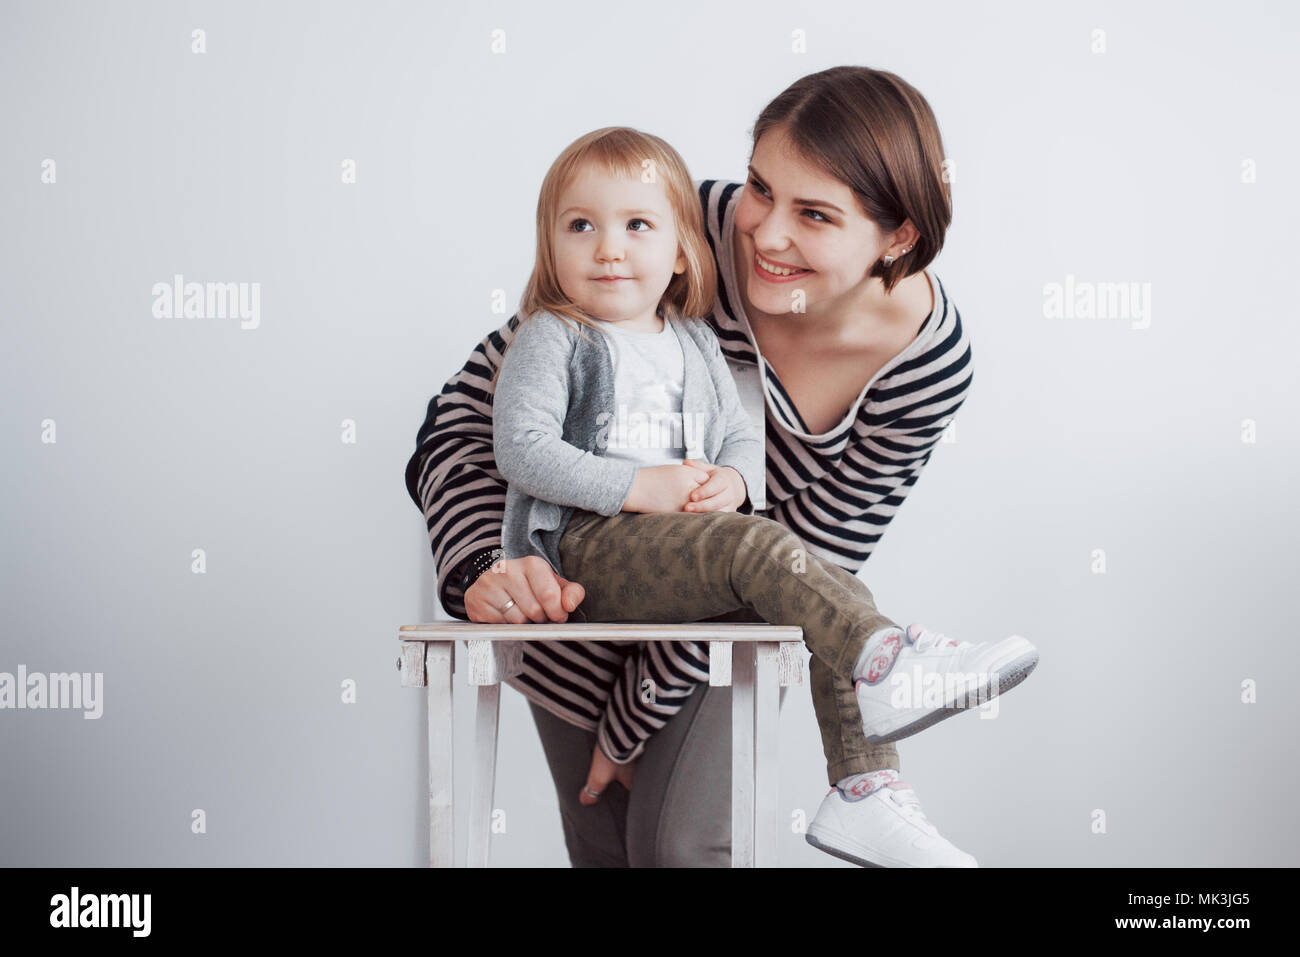 Happy loving family. Mother and her daughter child girl playing and hugging Stock Photo